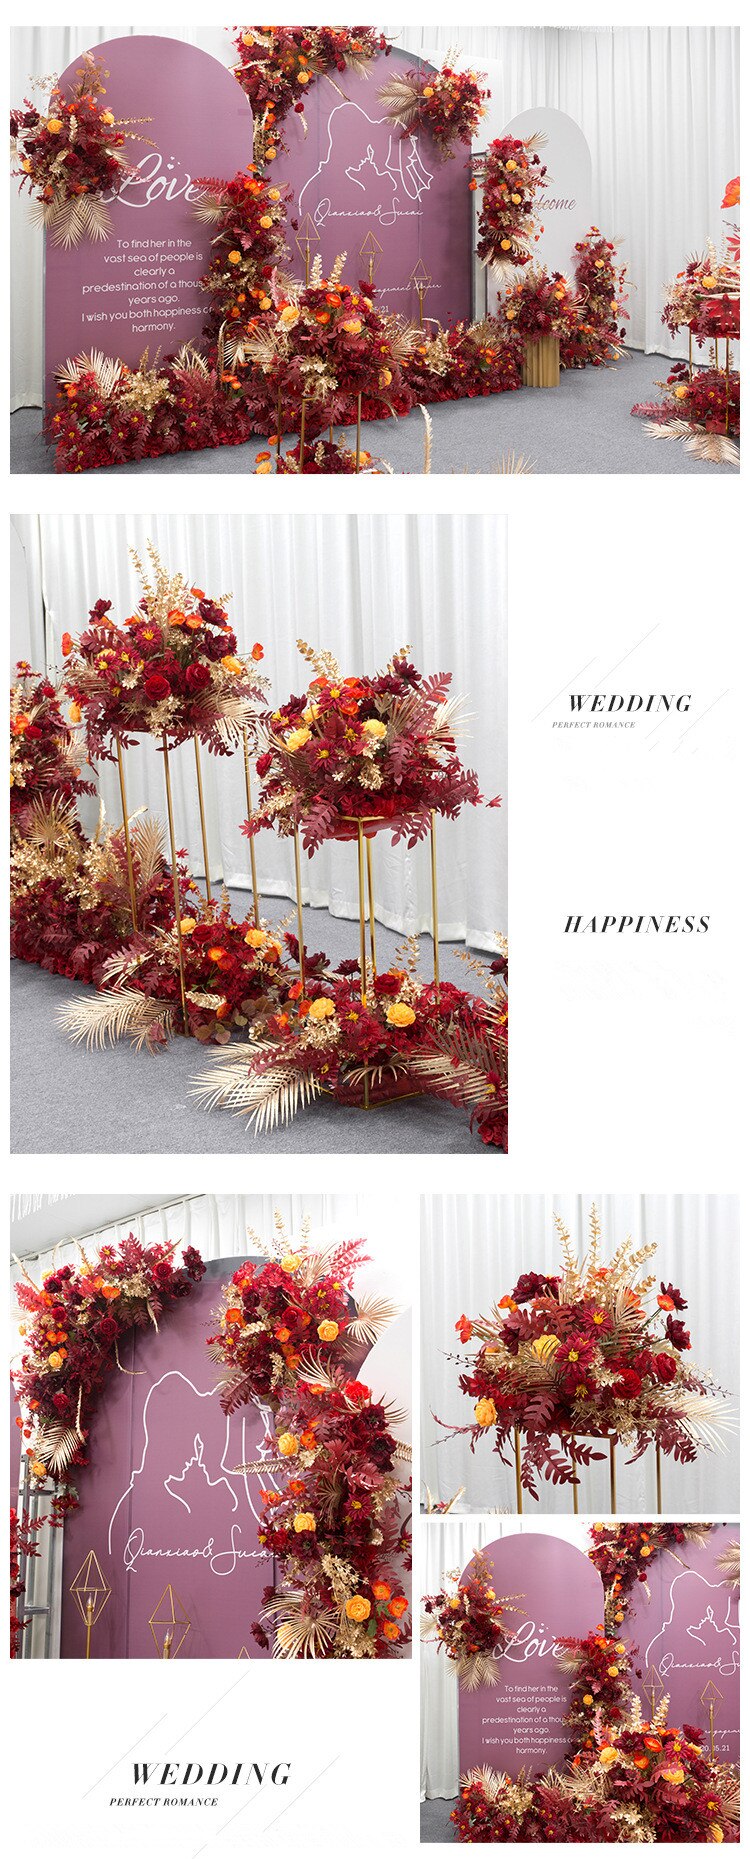 Renting Wedding Decorations: Affordable and Convenient Solutions